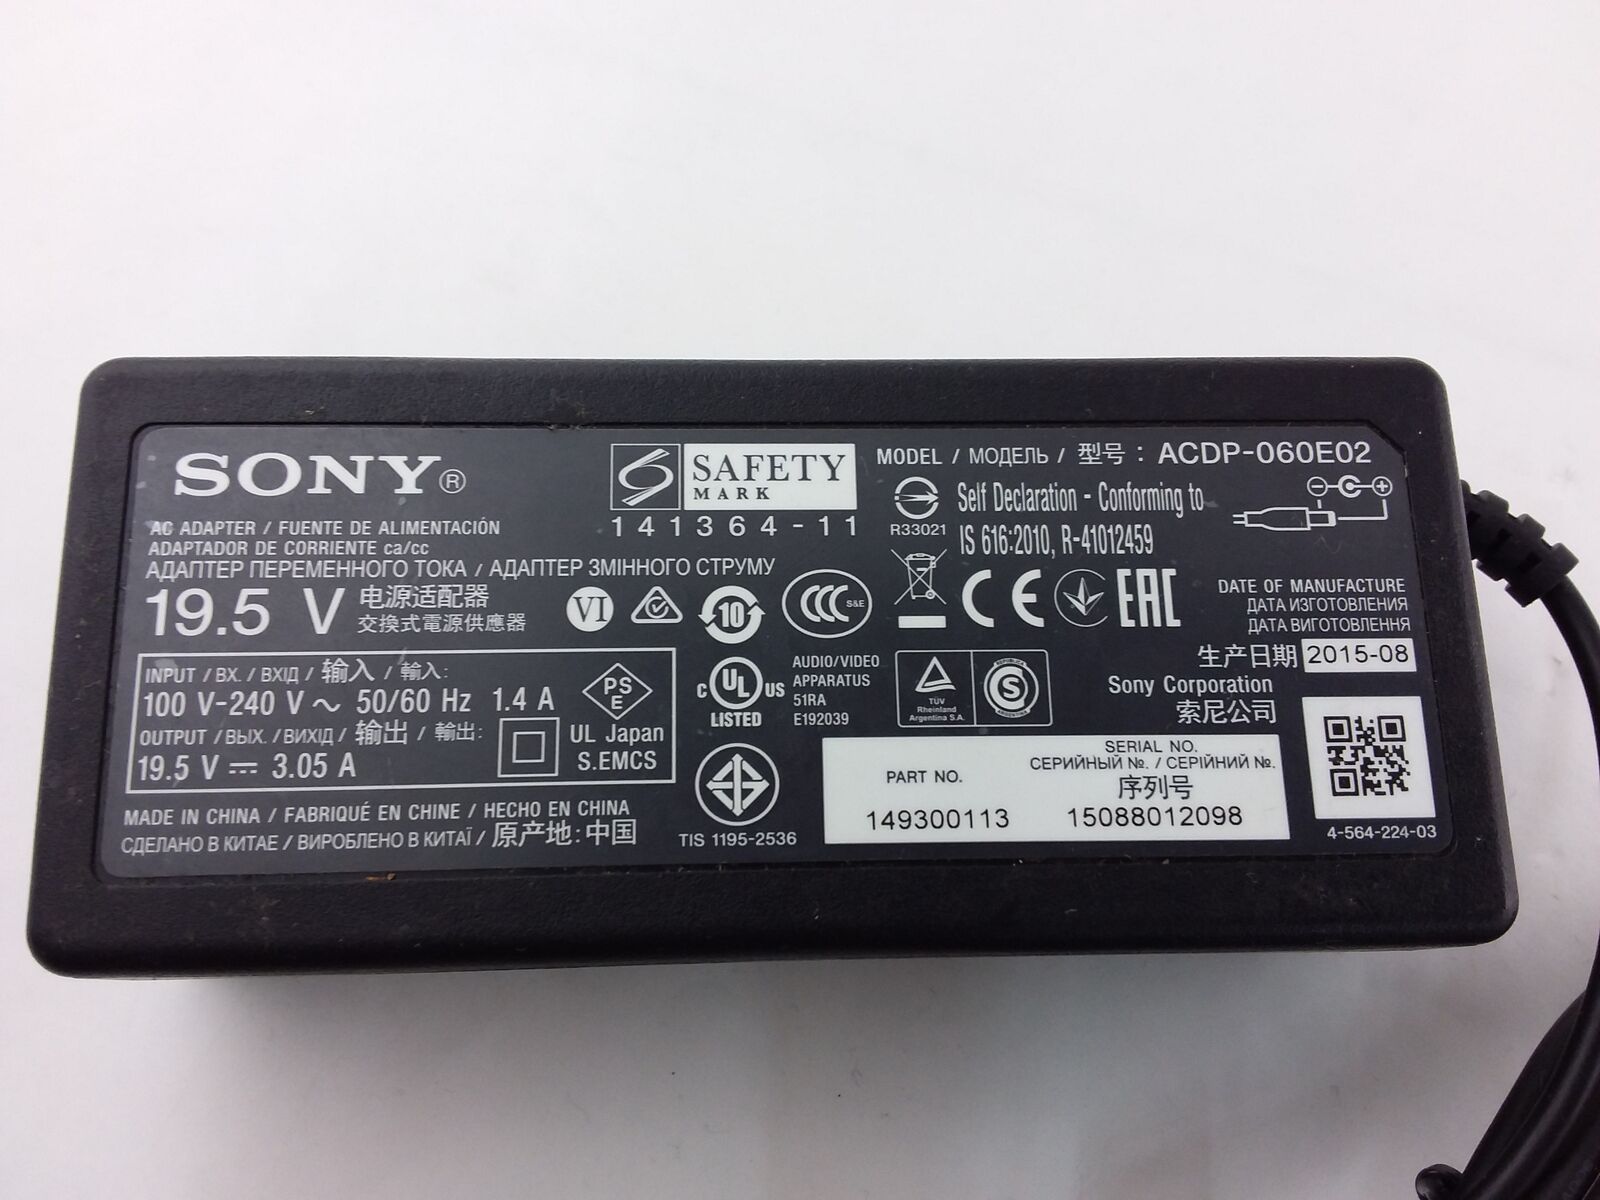 Original Sony ACDP-060E02 TV Power Adapter Cable Cord Box Brand: Sony MPN: ACDP-060E02-USED Type: Power Adapter - TV - Click Image to Close